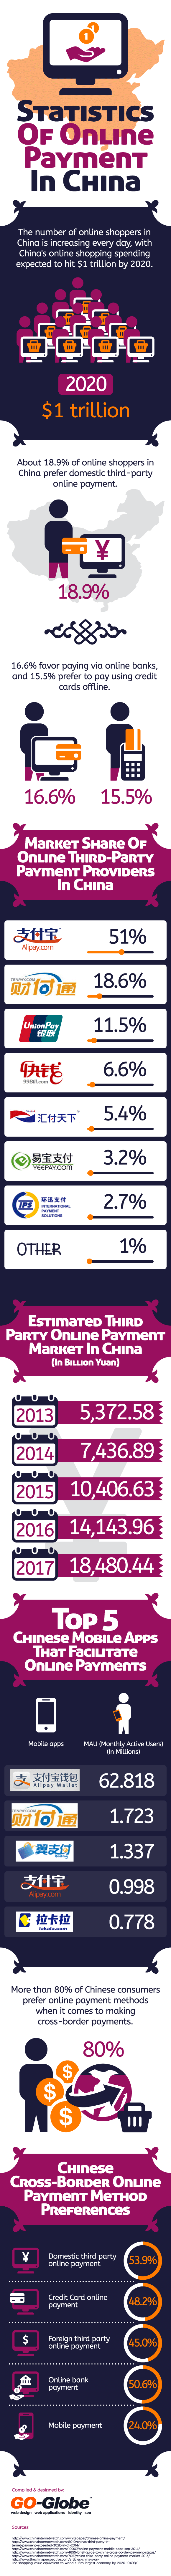 Online payment in China